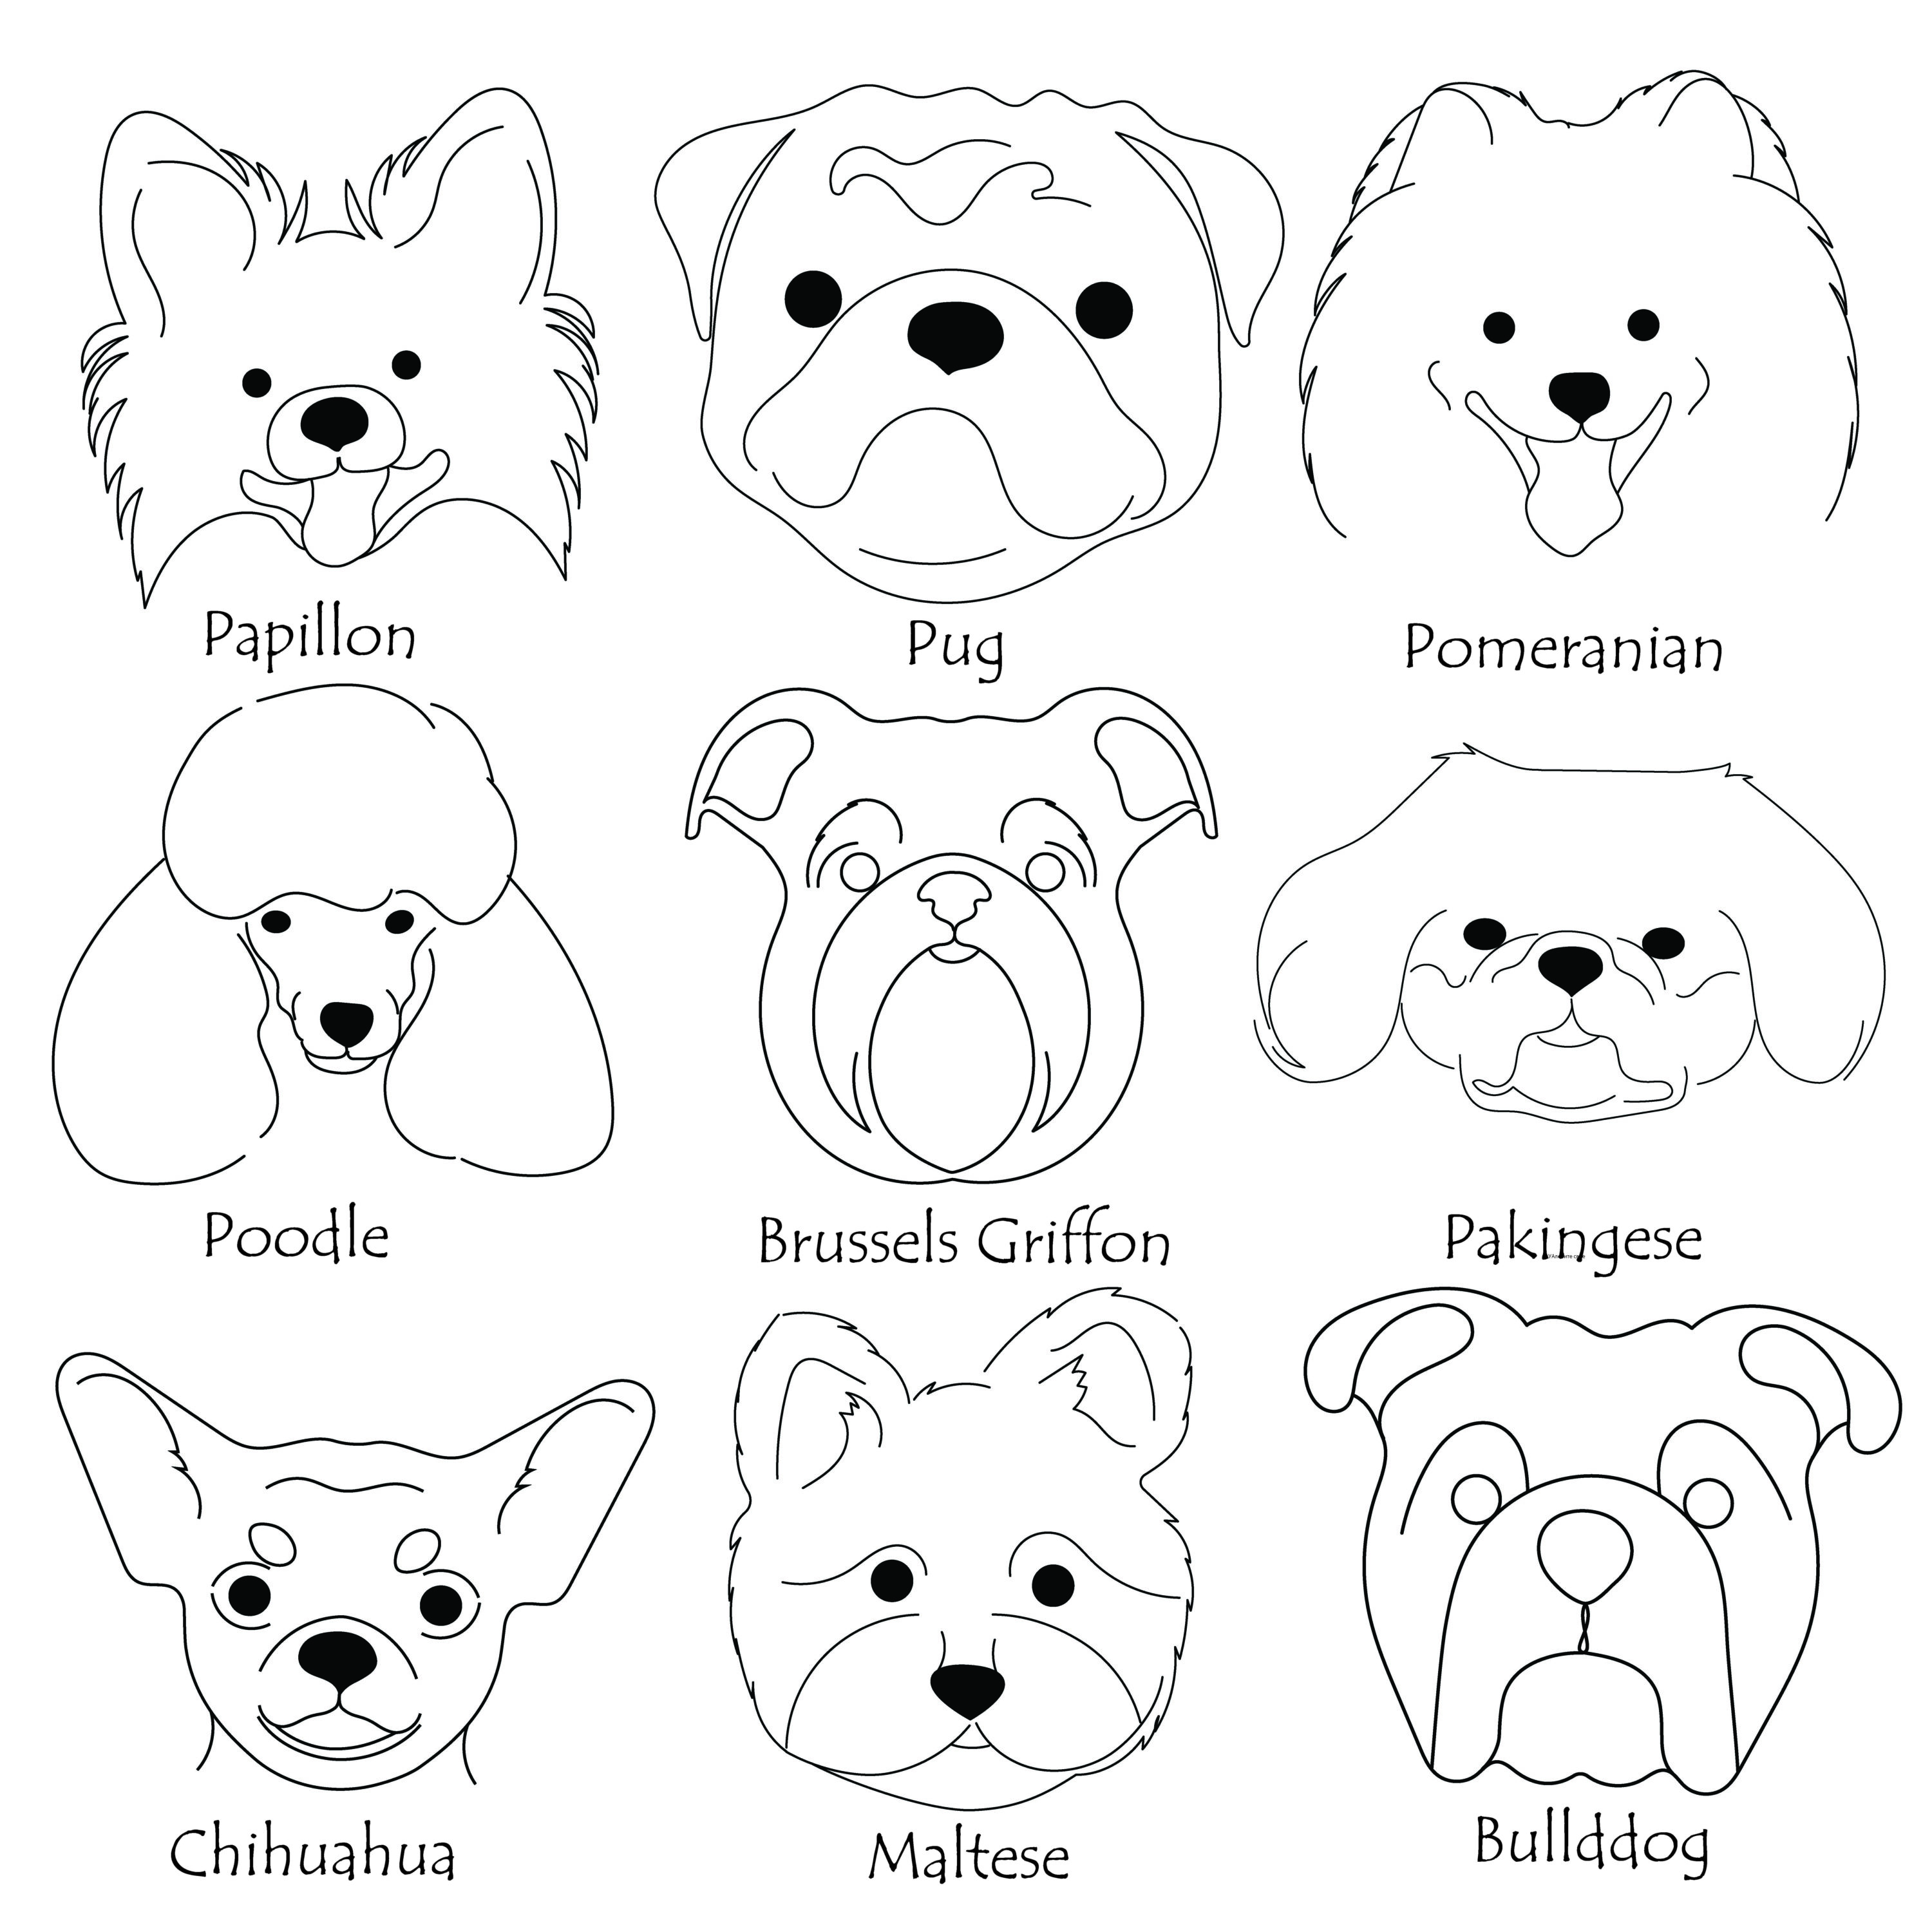 Set of animal faces with the names of them.